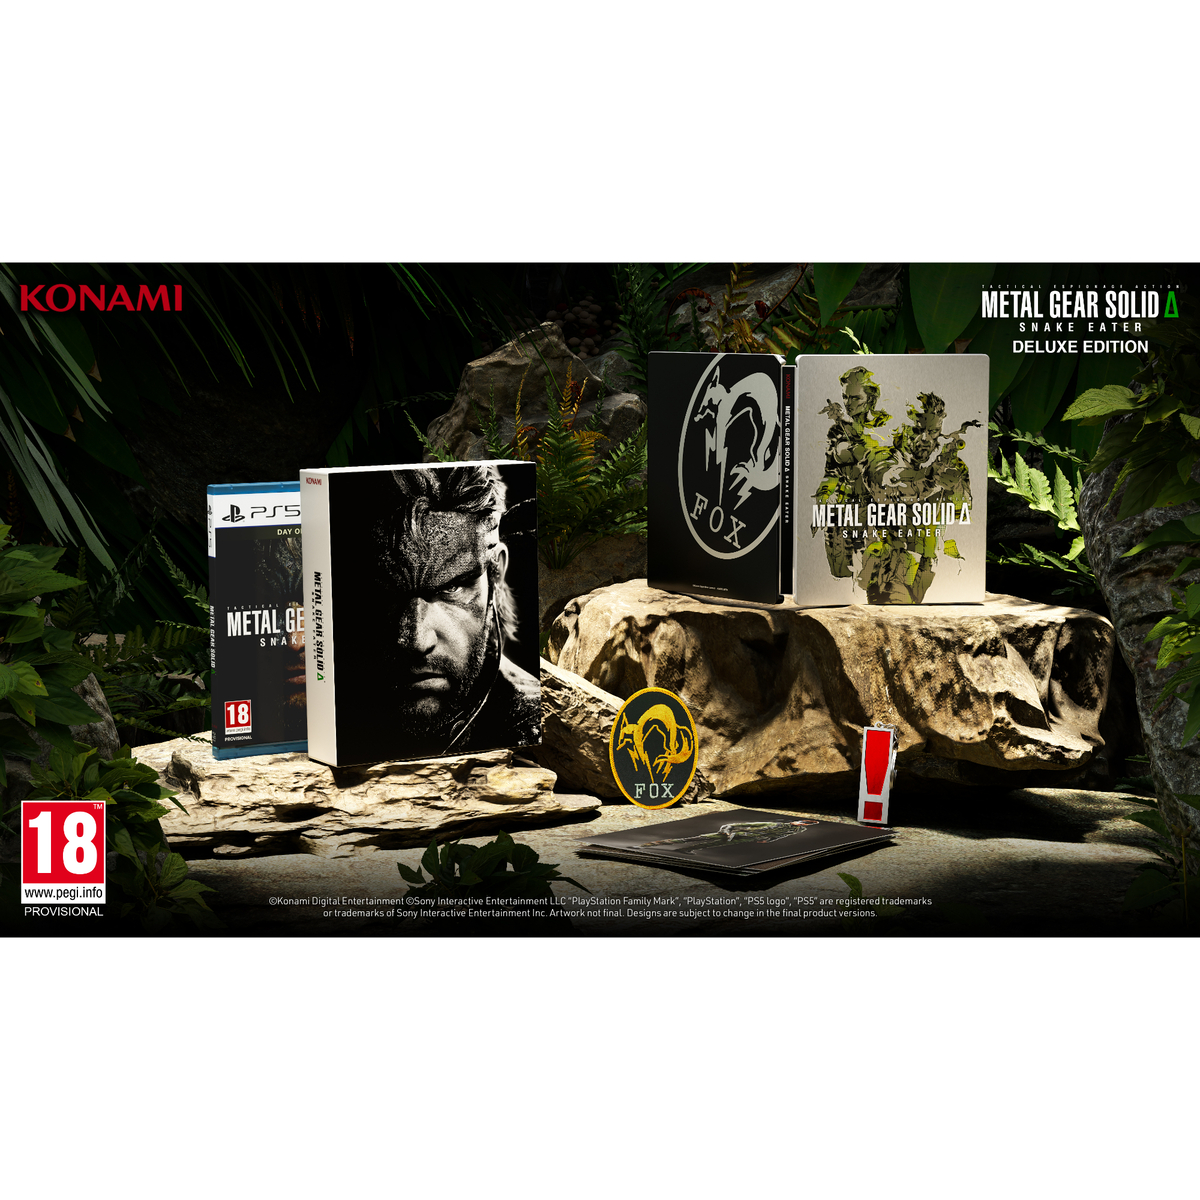 PRE-ORDER Metal Gear Solid Δ: Snake Eater Deluxe Edition for PS5